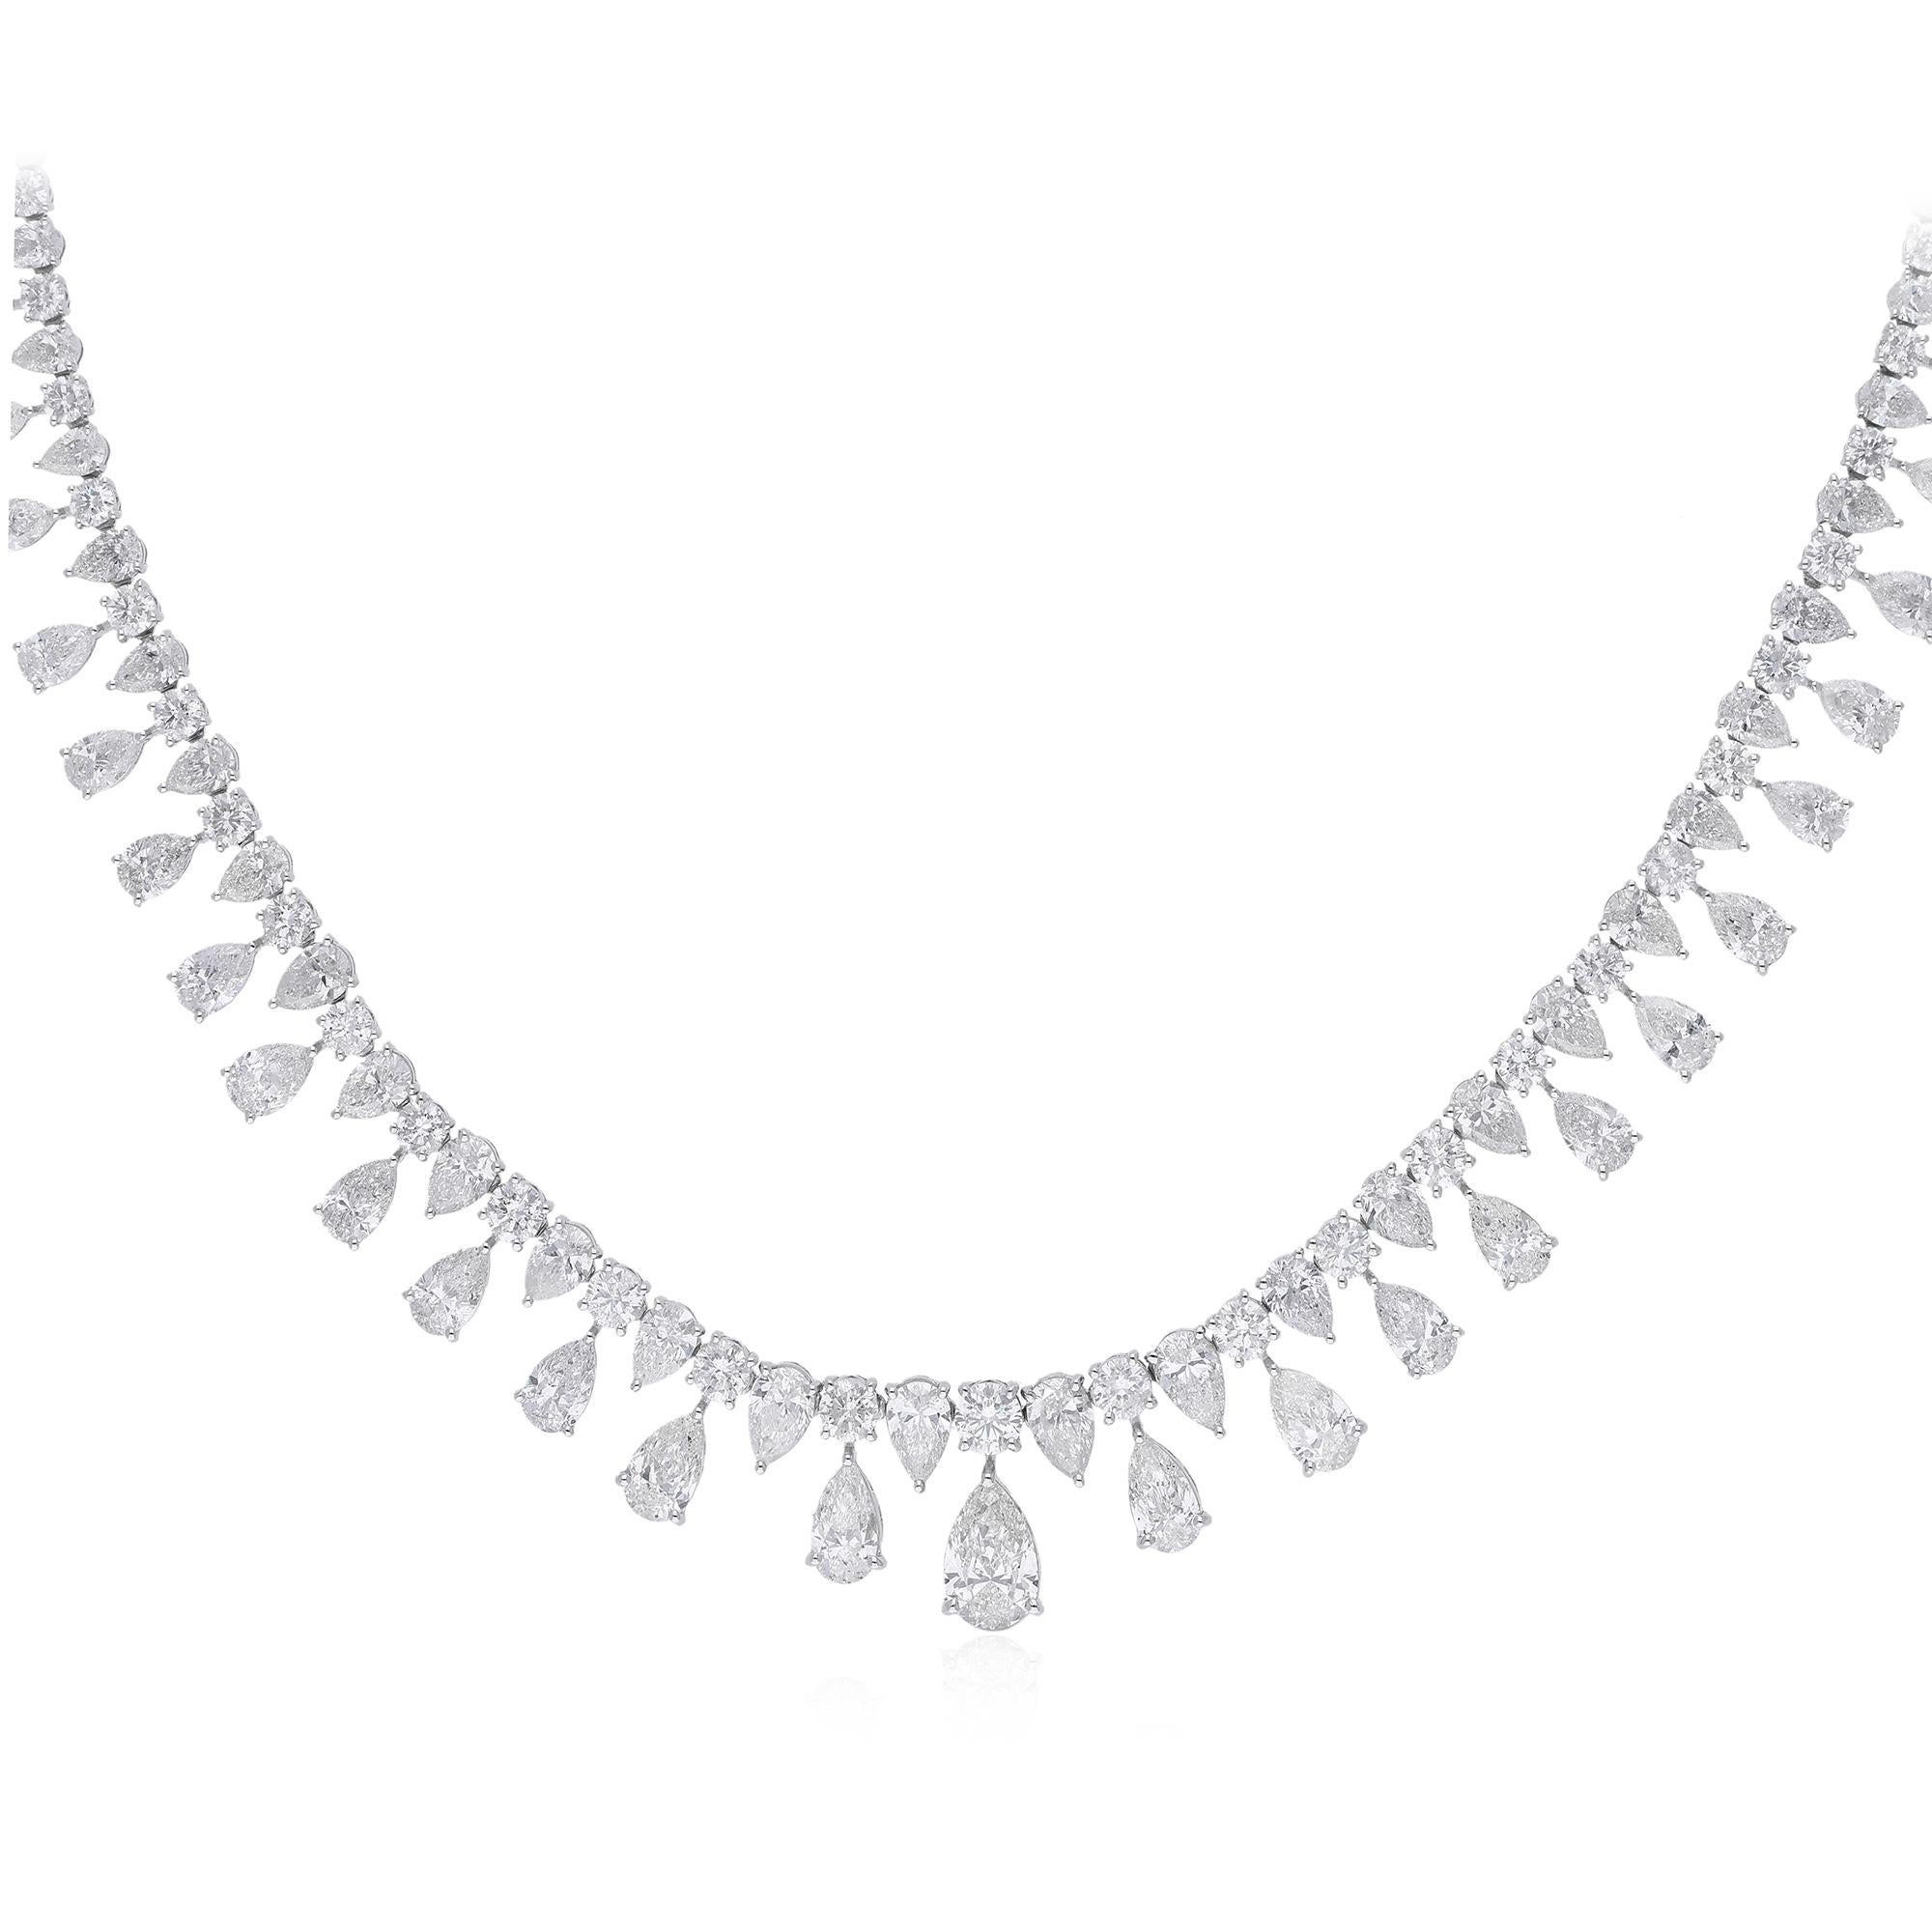 Handcrafted with precision and passion by skilled artisans, this necklace is a true testament to the artistry and craftsmanship of fine jewelry making. Every facet is polished to perfection, ensuring a flawless finish that exudes luxury and